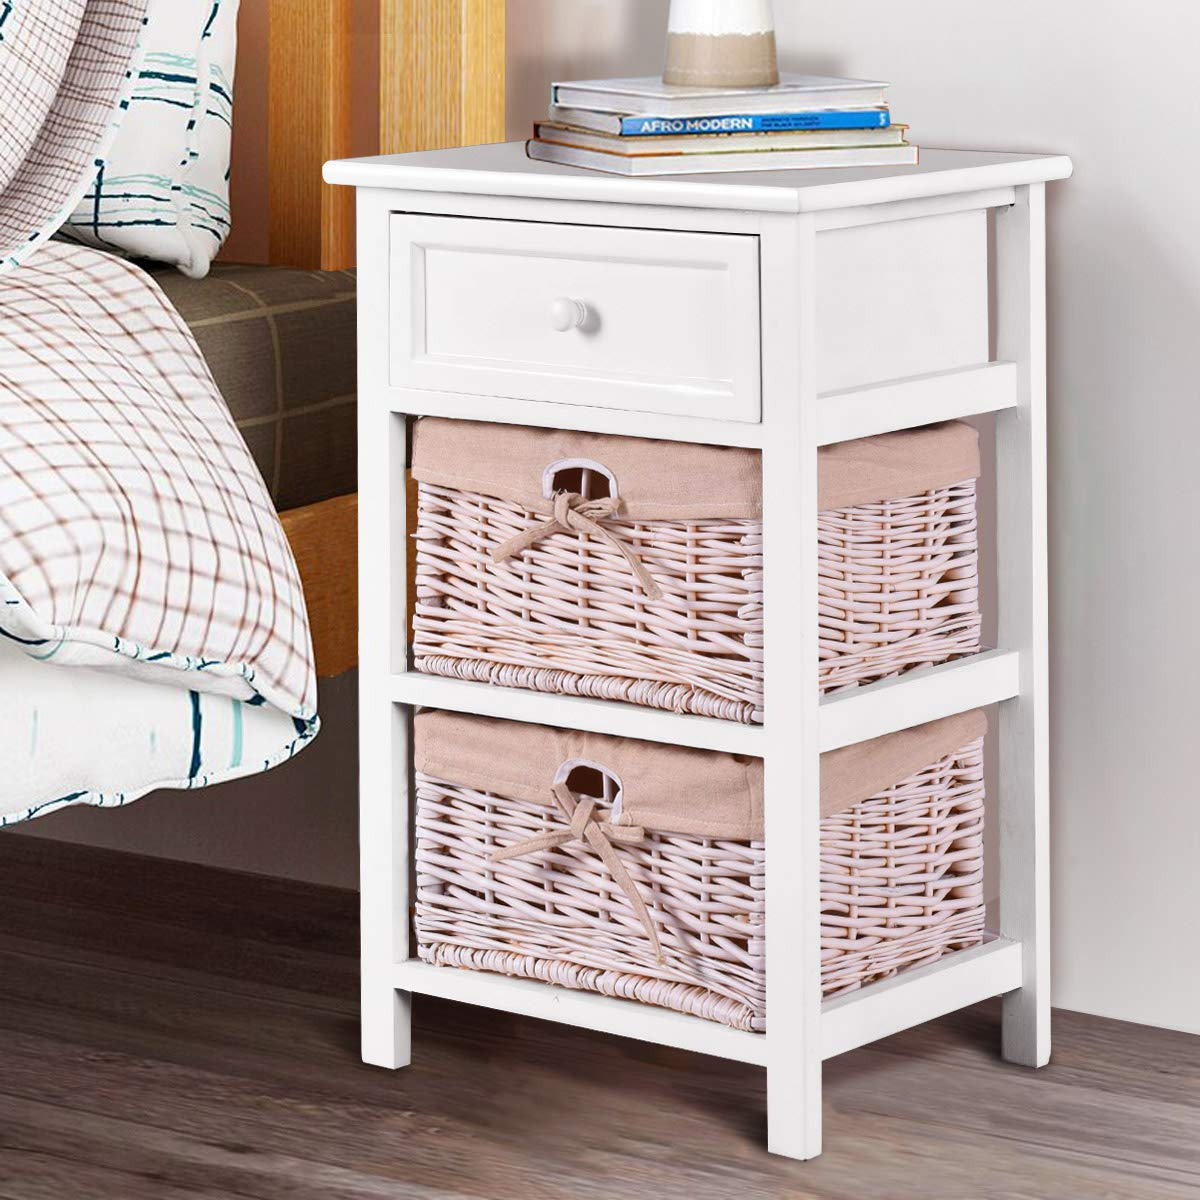 Giantex Wooden Nightstand 3 Tiers W/ 2 Baskets and 1 Drawer Bedside Sofa Storage Organizer